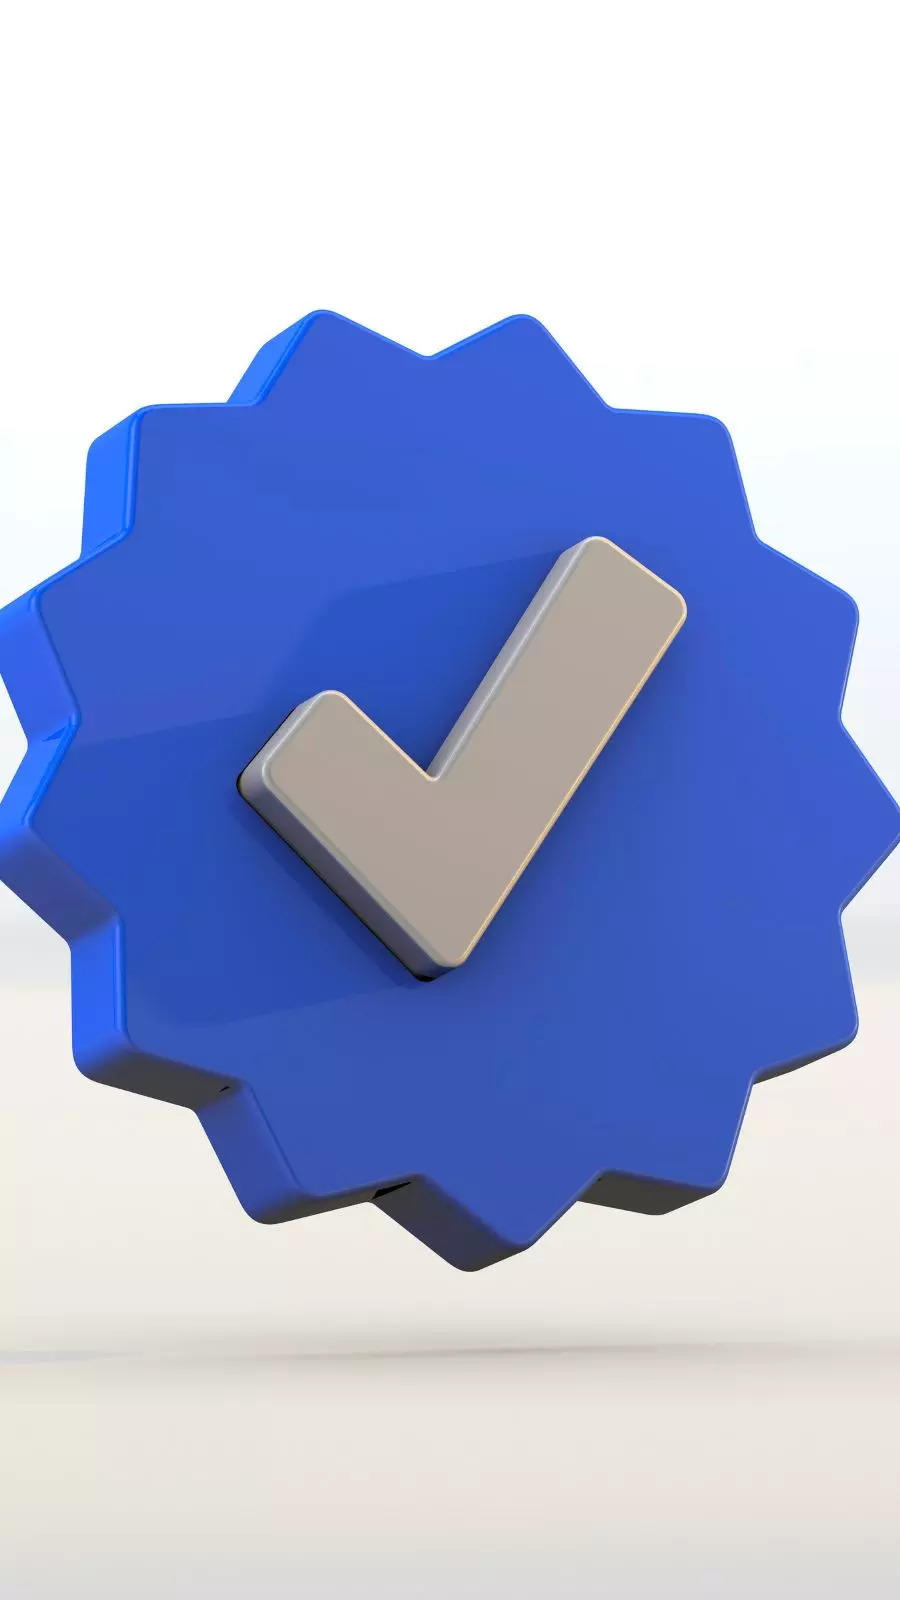 Instagram Lets Users Apply to Become Verified